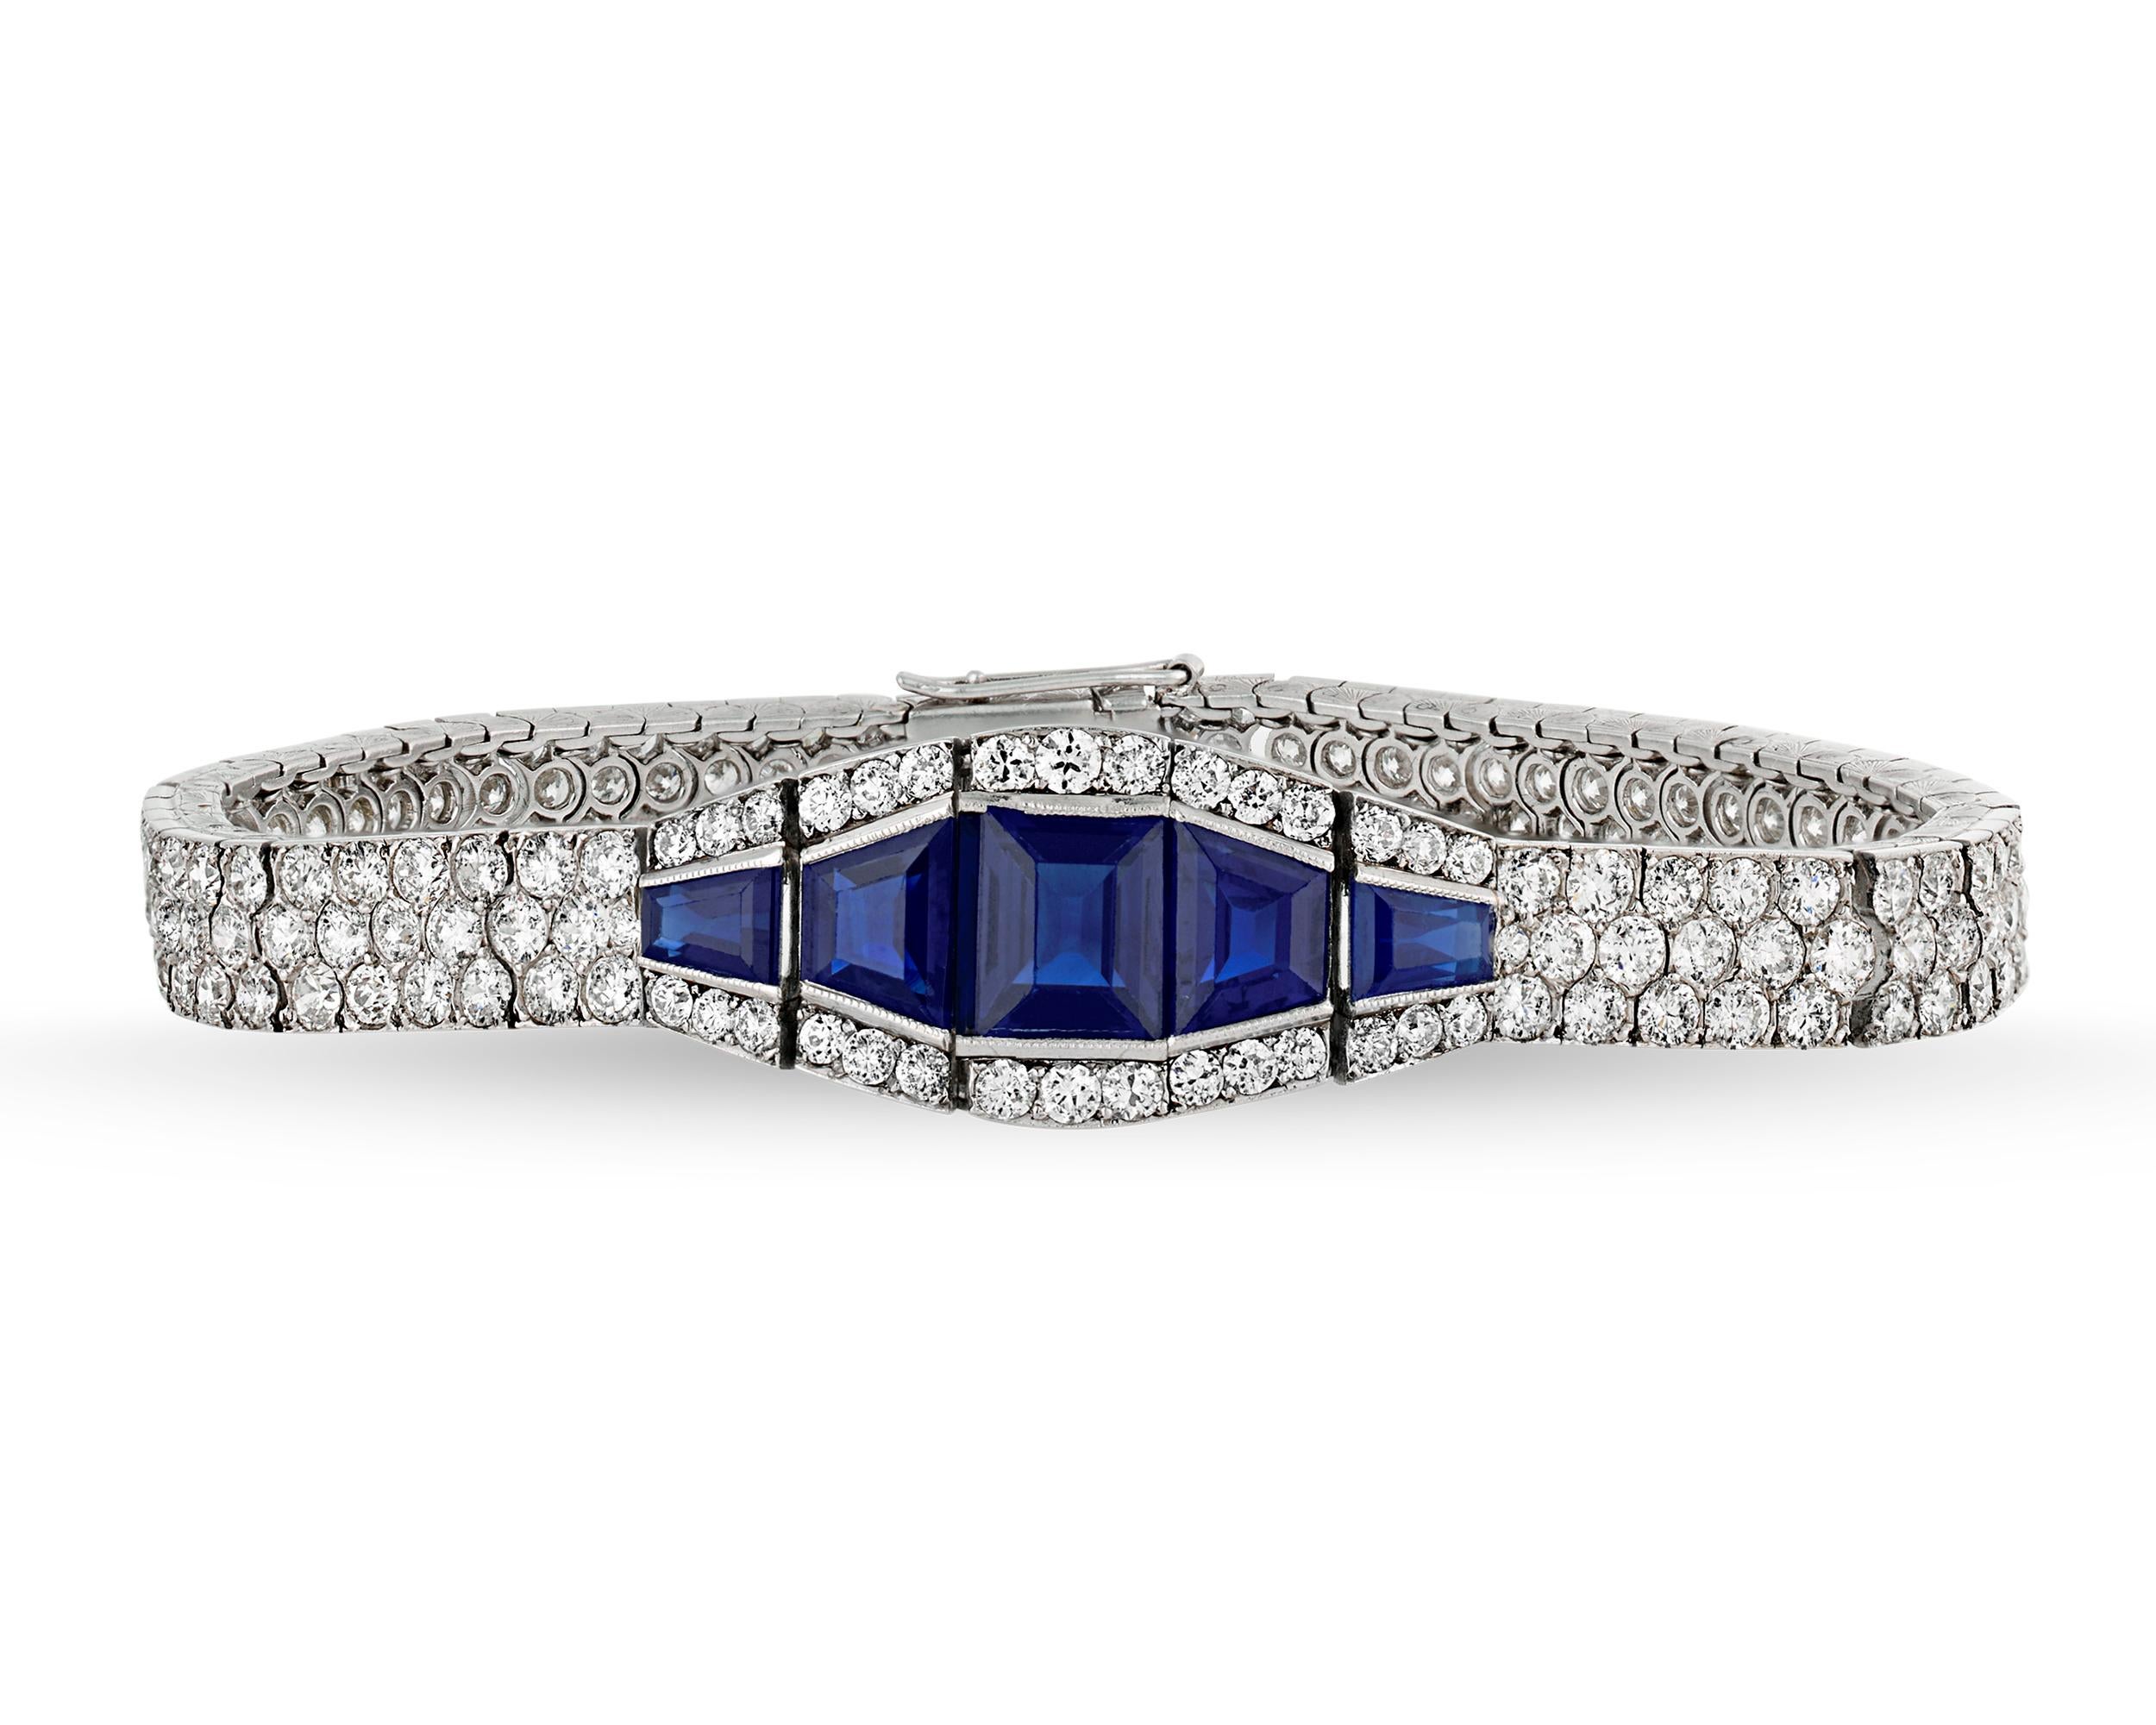 This spectacular sapphire bracelet embodies the sleek and stylish spirit of Art Deco design. The bracelet is embedded with a bold geometric design of white diamonds totaling approximately 16.00 carats, while rich, royal blue sapphires totaling